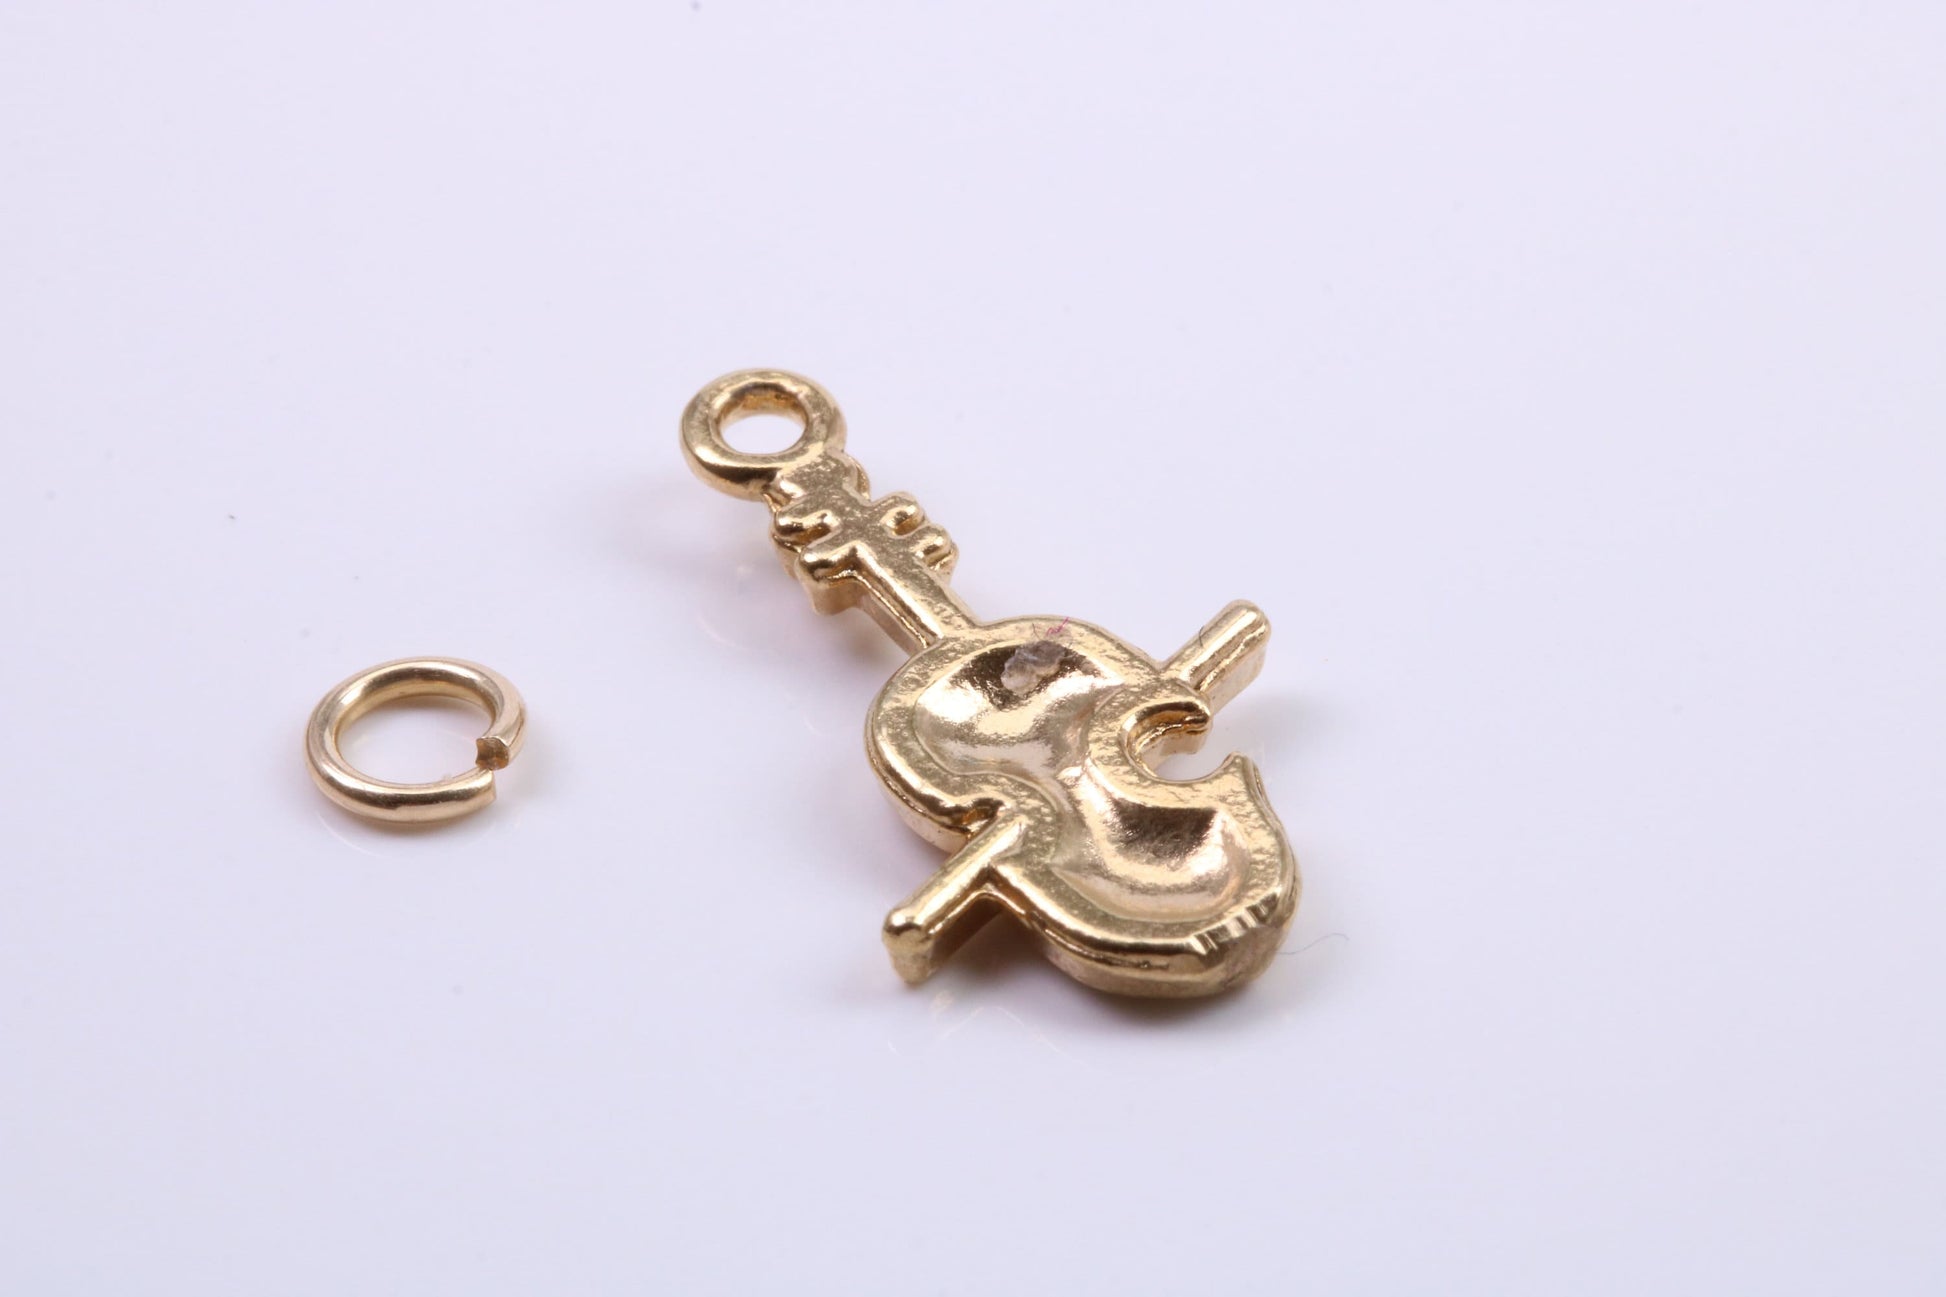 Violin Charm, Traditional Charm, Made from Solid 9ct Yellow Gold, British Hallmarked, Complete with Attachment Link